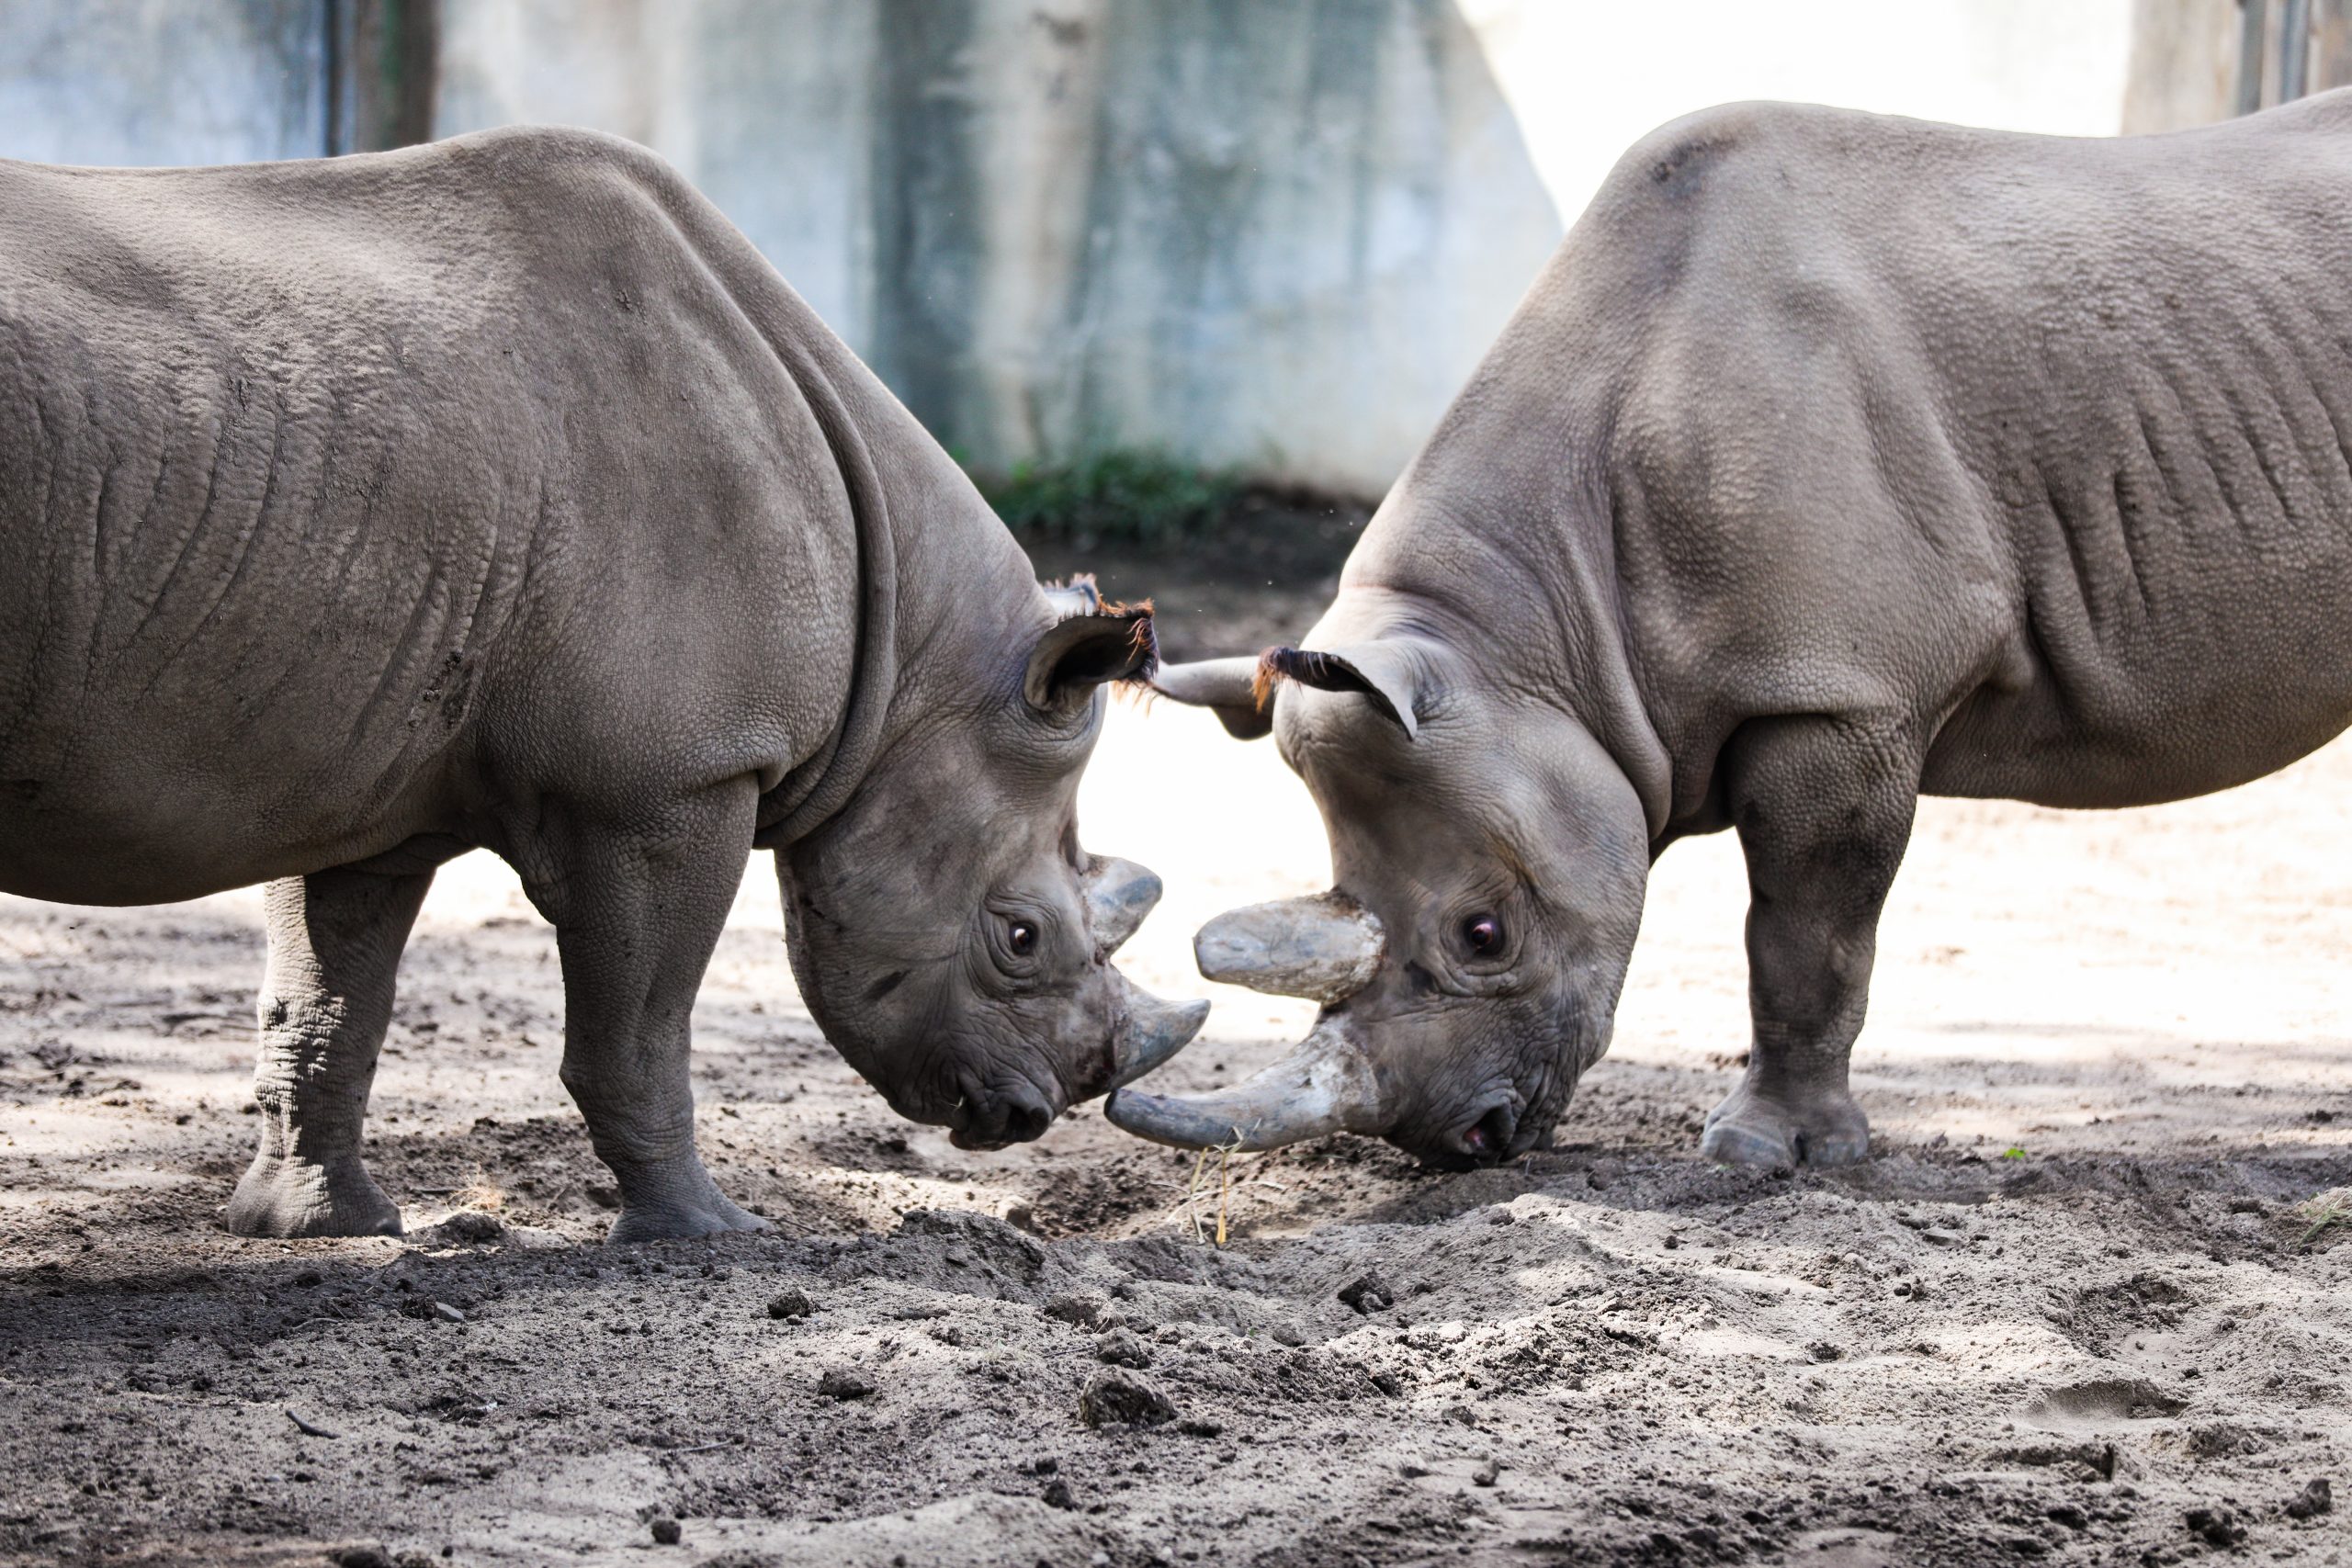 Potter Park Zoo's Black Rhino Calf Heading to a New Home in the Fall |  Potter Park Zoo